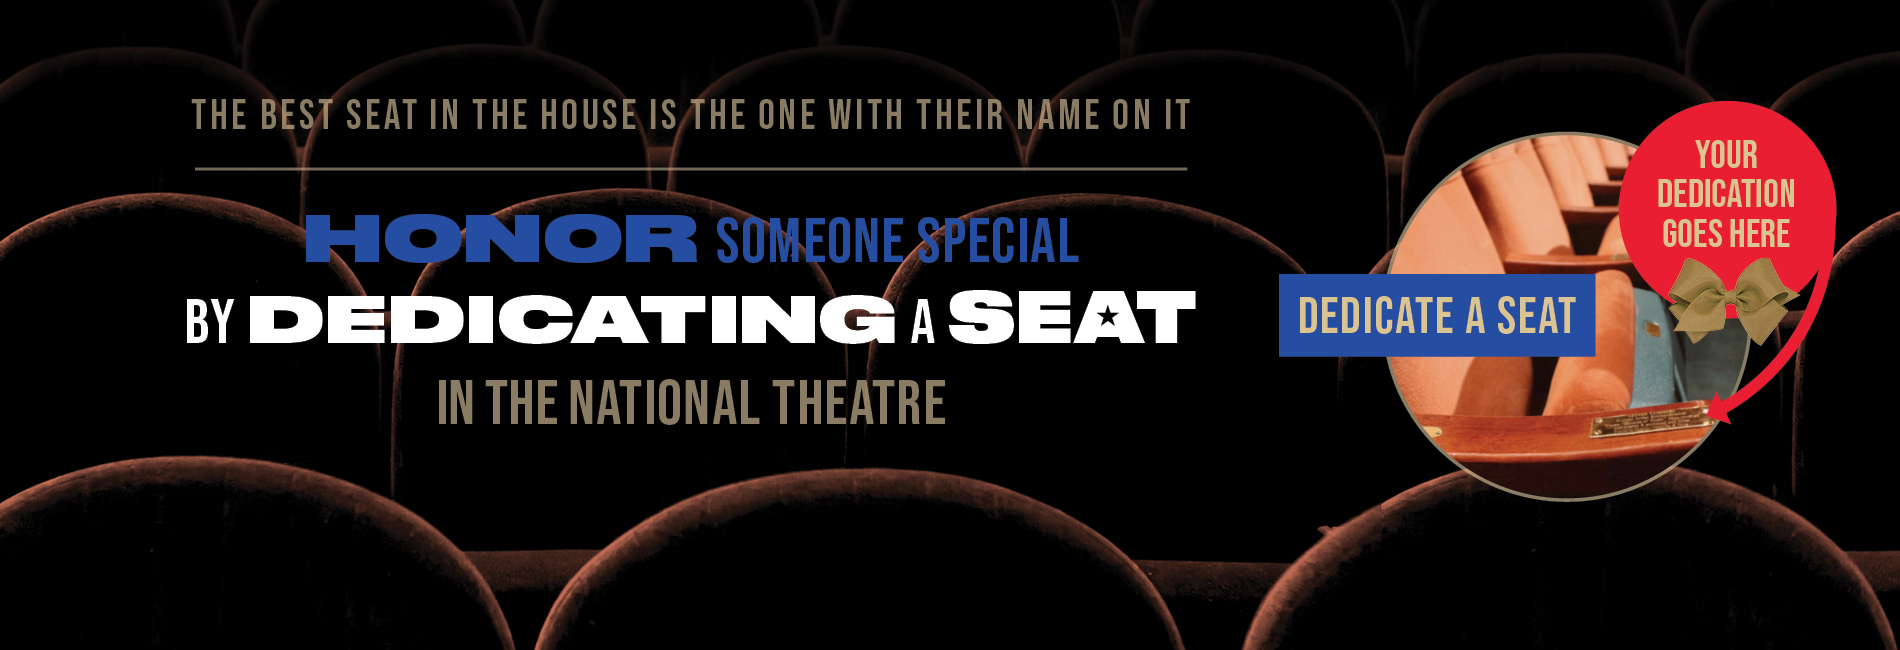 Slide 4: Dedicate a seat at The National